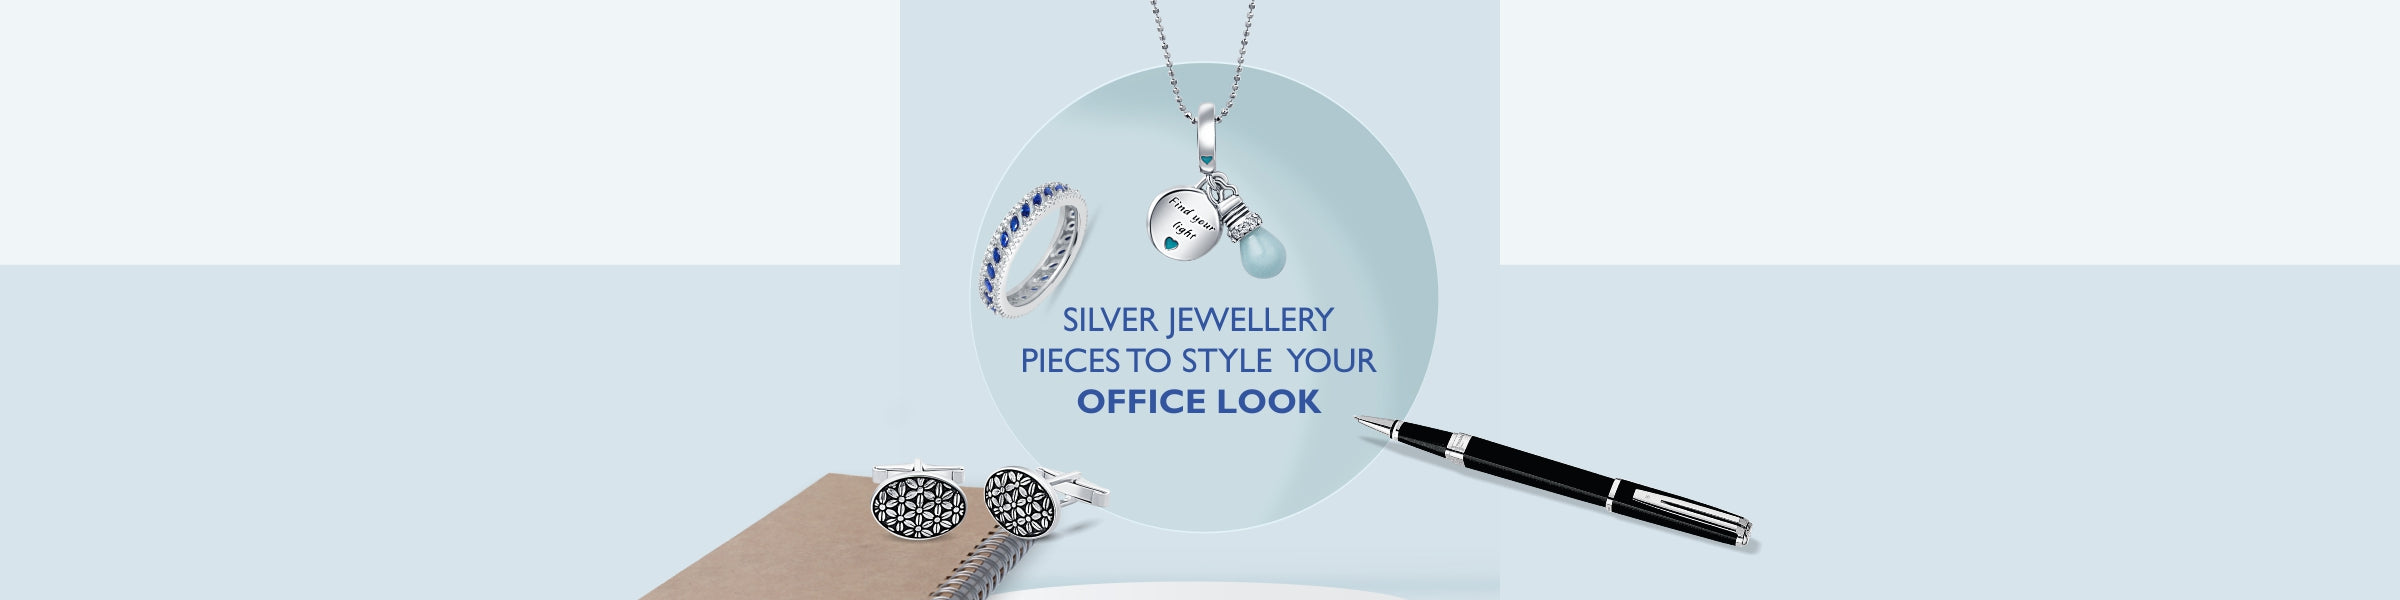 5 Silver Jewellery Pieces to Style Your Office Look